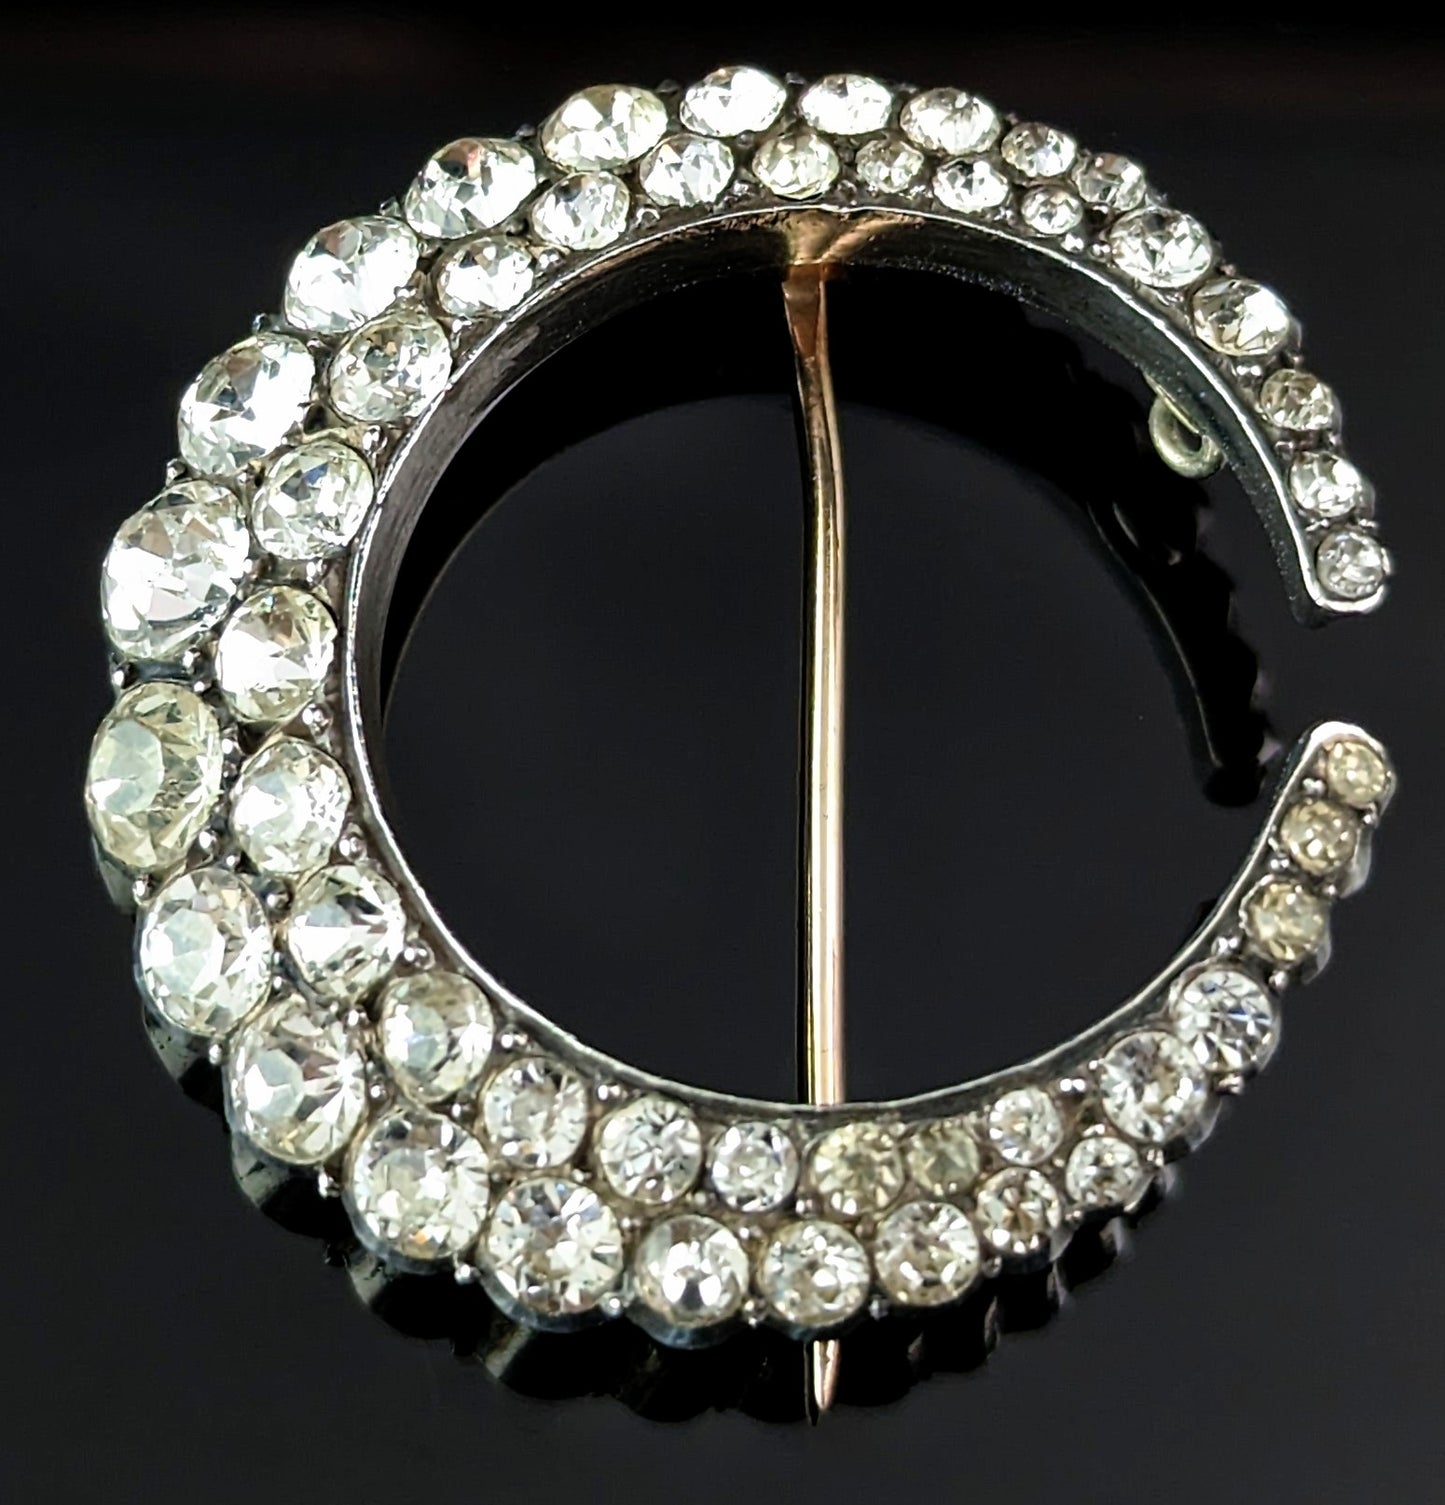 Antique Paste Crescent moon brooch, 9k gold and silver